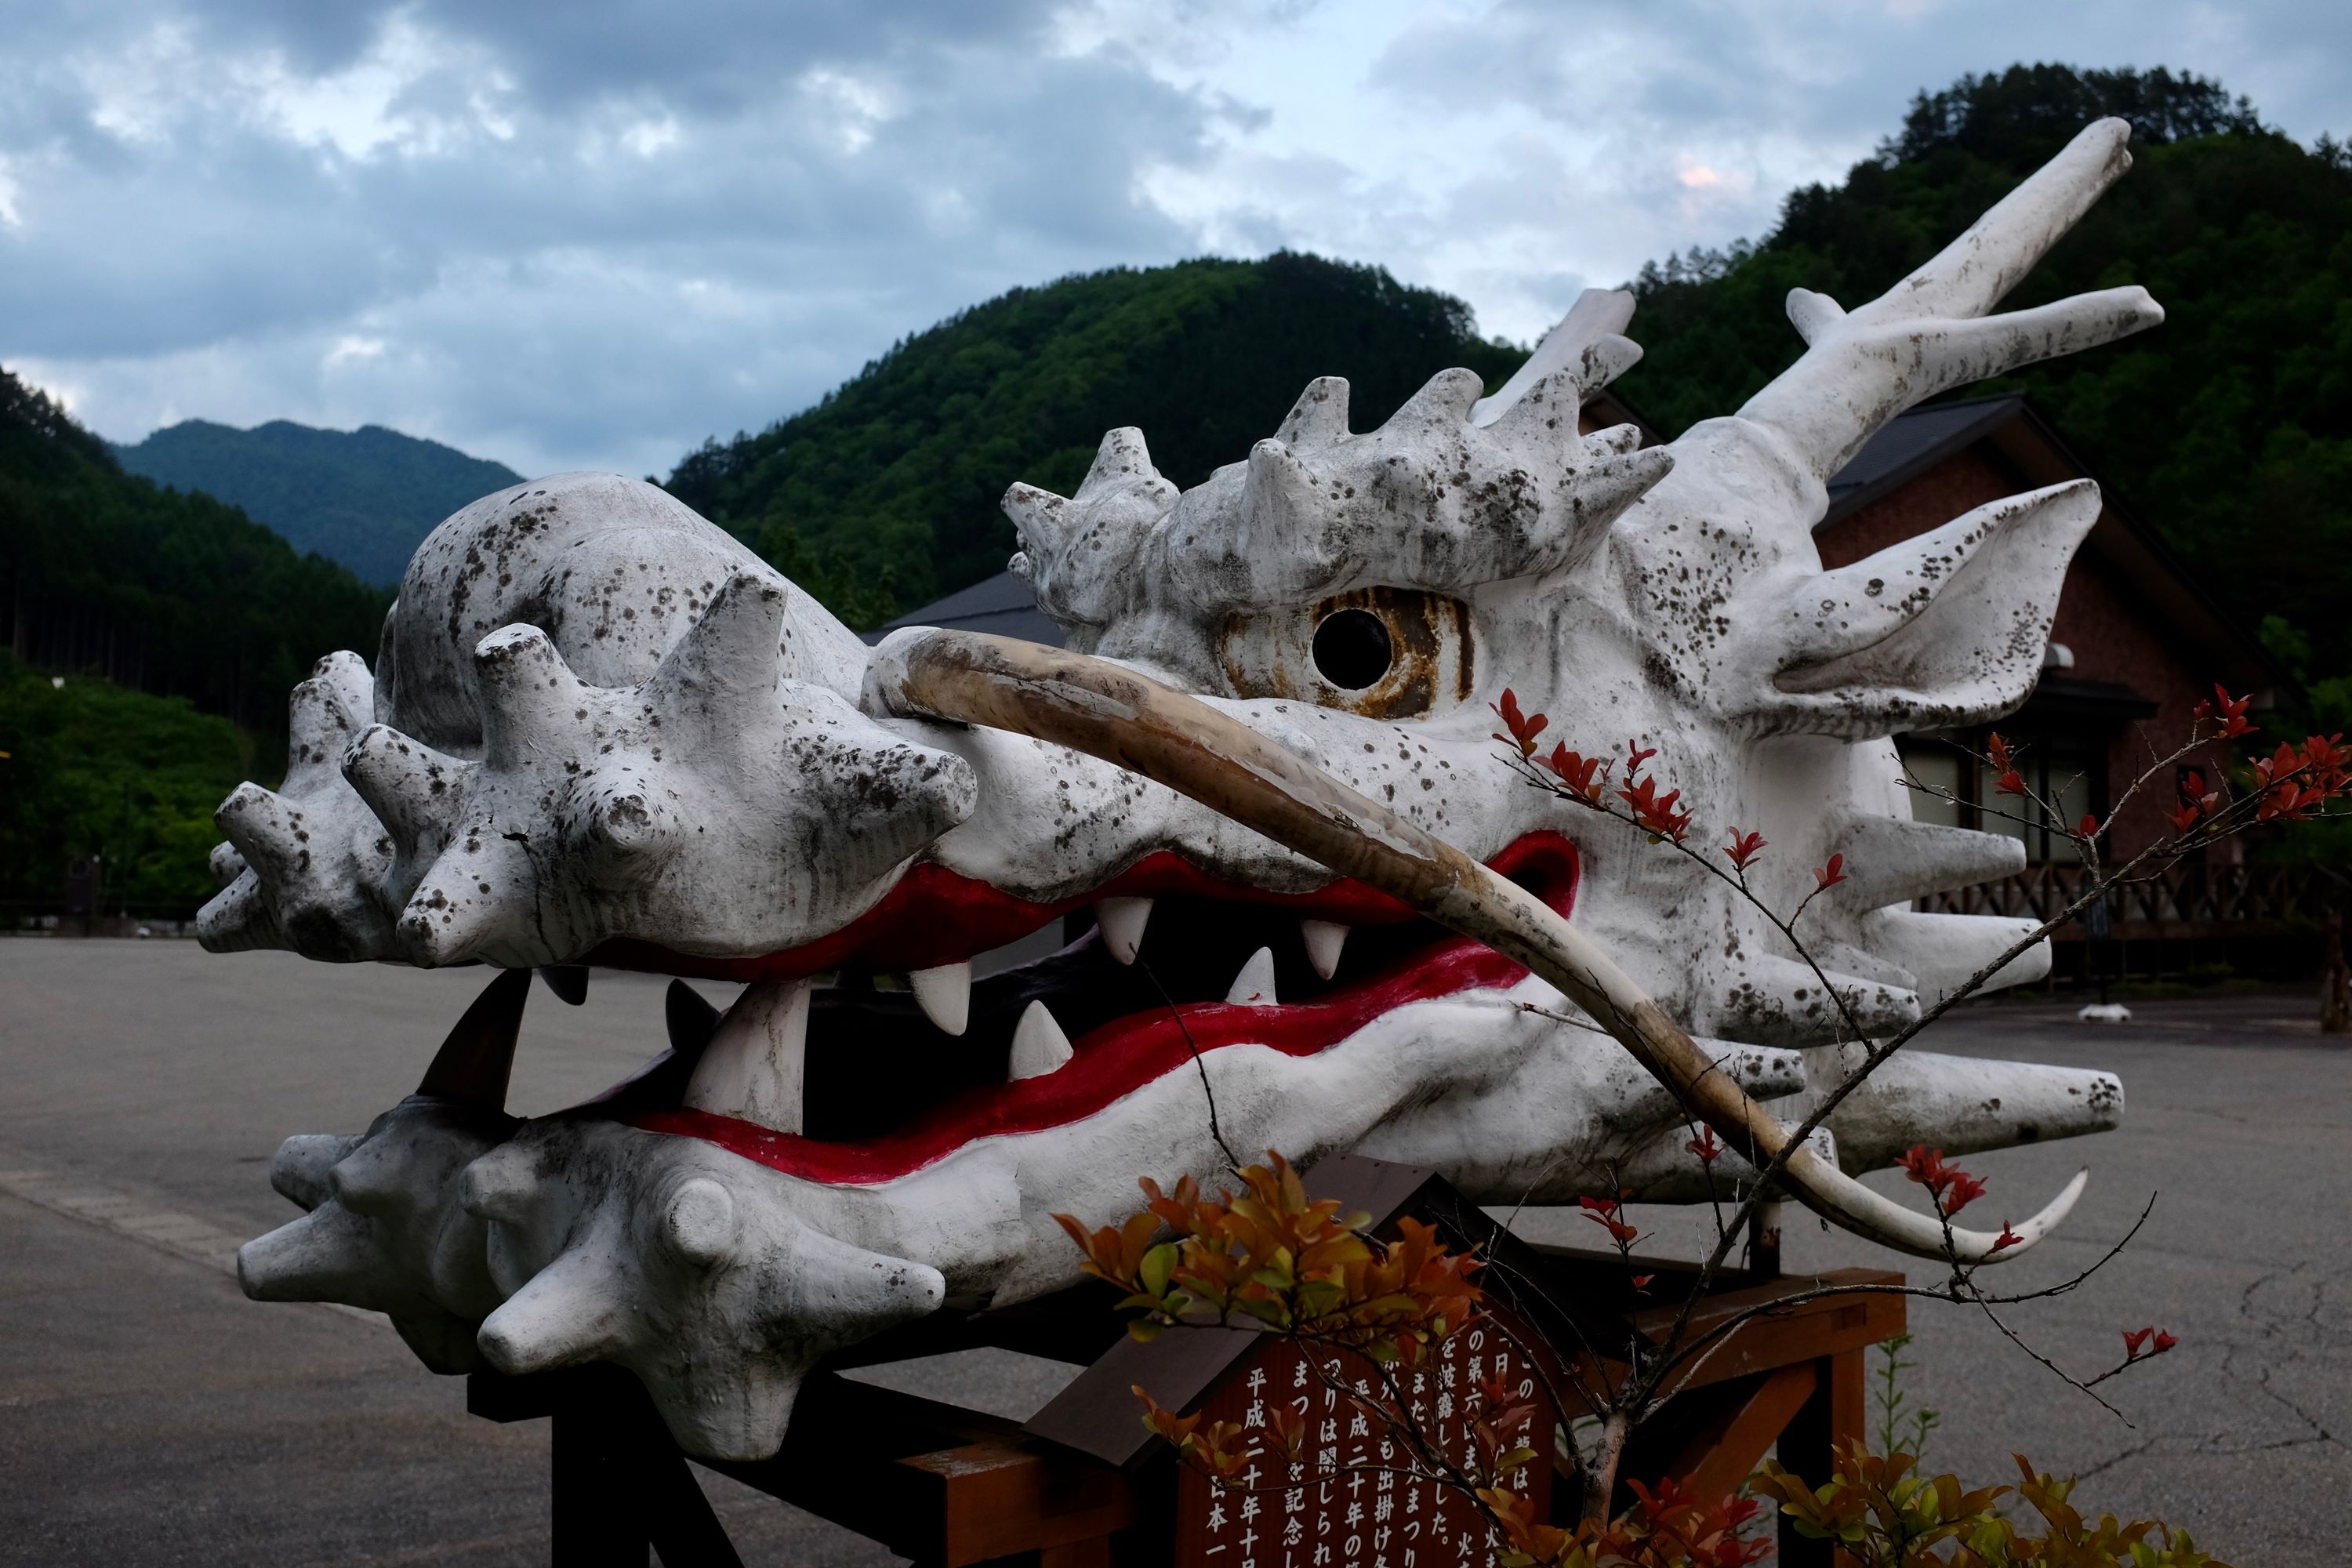 The head of a white, Japanese-style dragon on a plinth by the road.